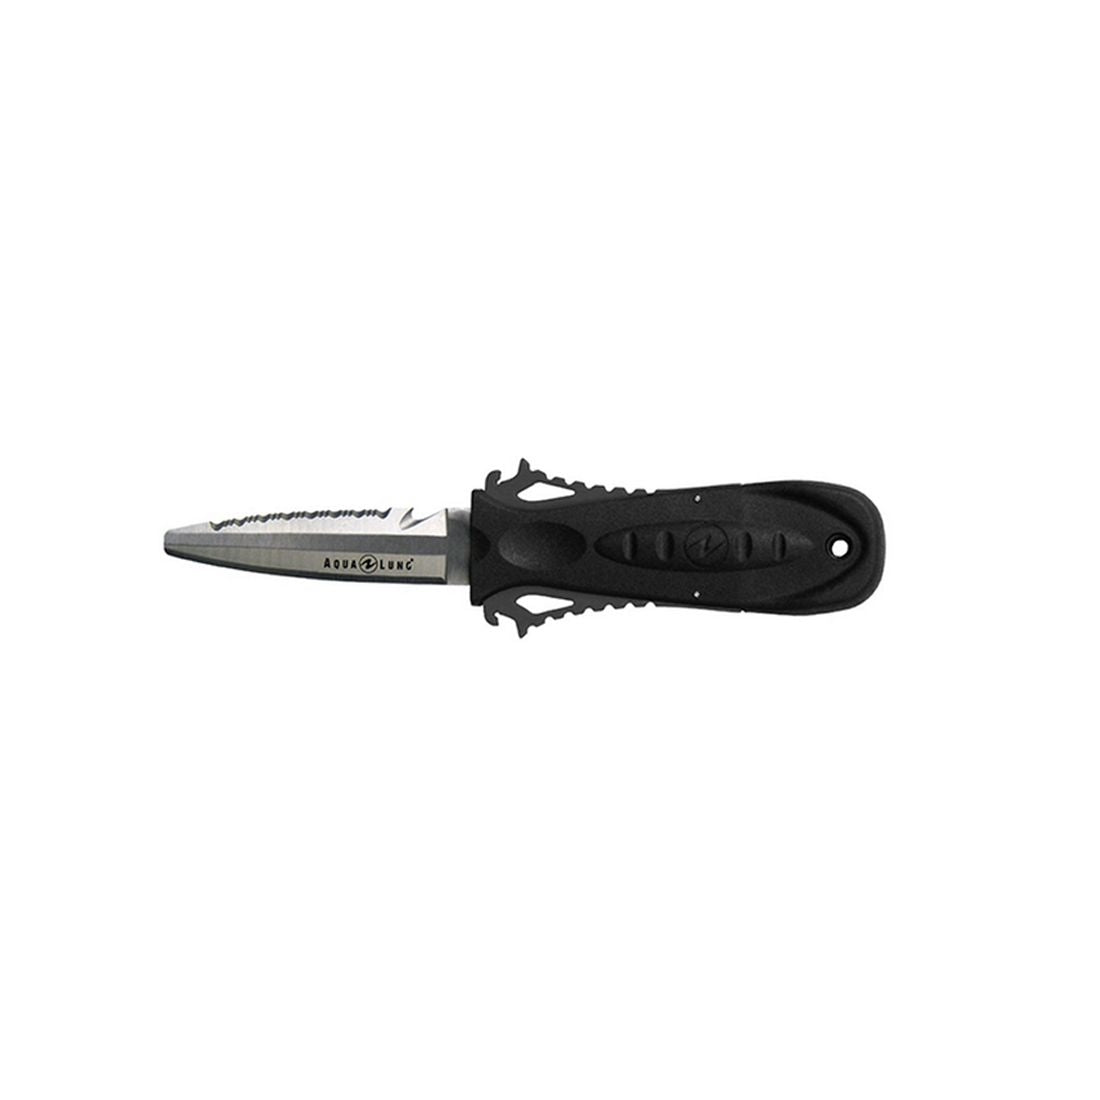 Aqua Lung Squeeze Lock Dive Knife Stainless Steel Scuba Diving